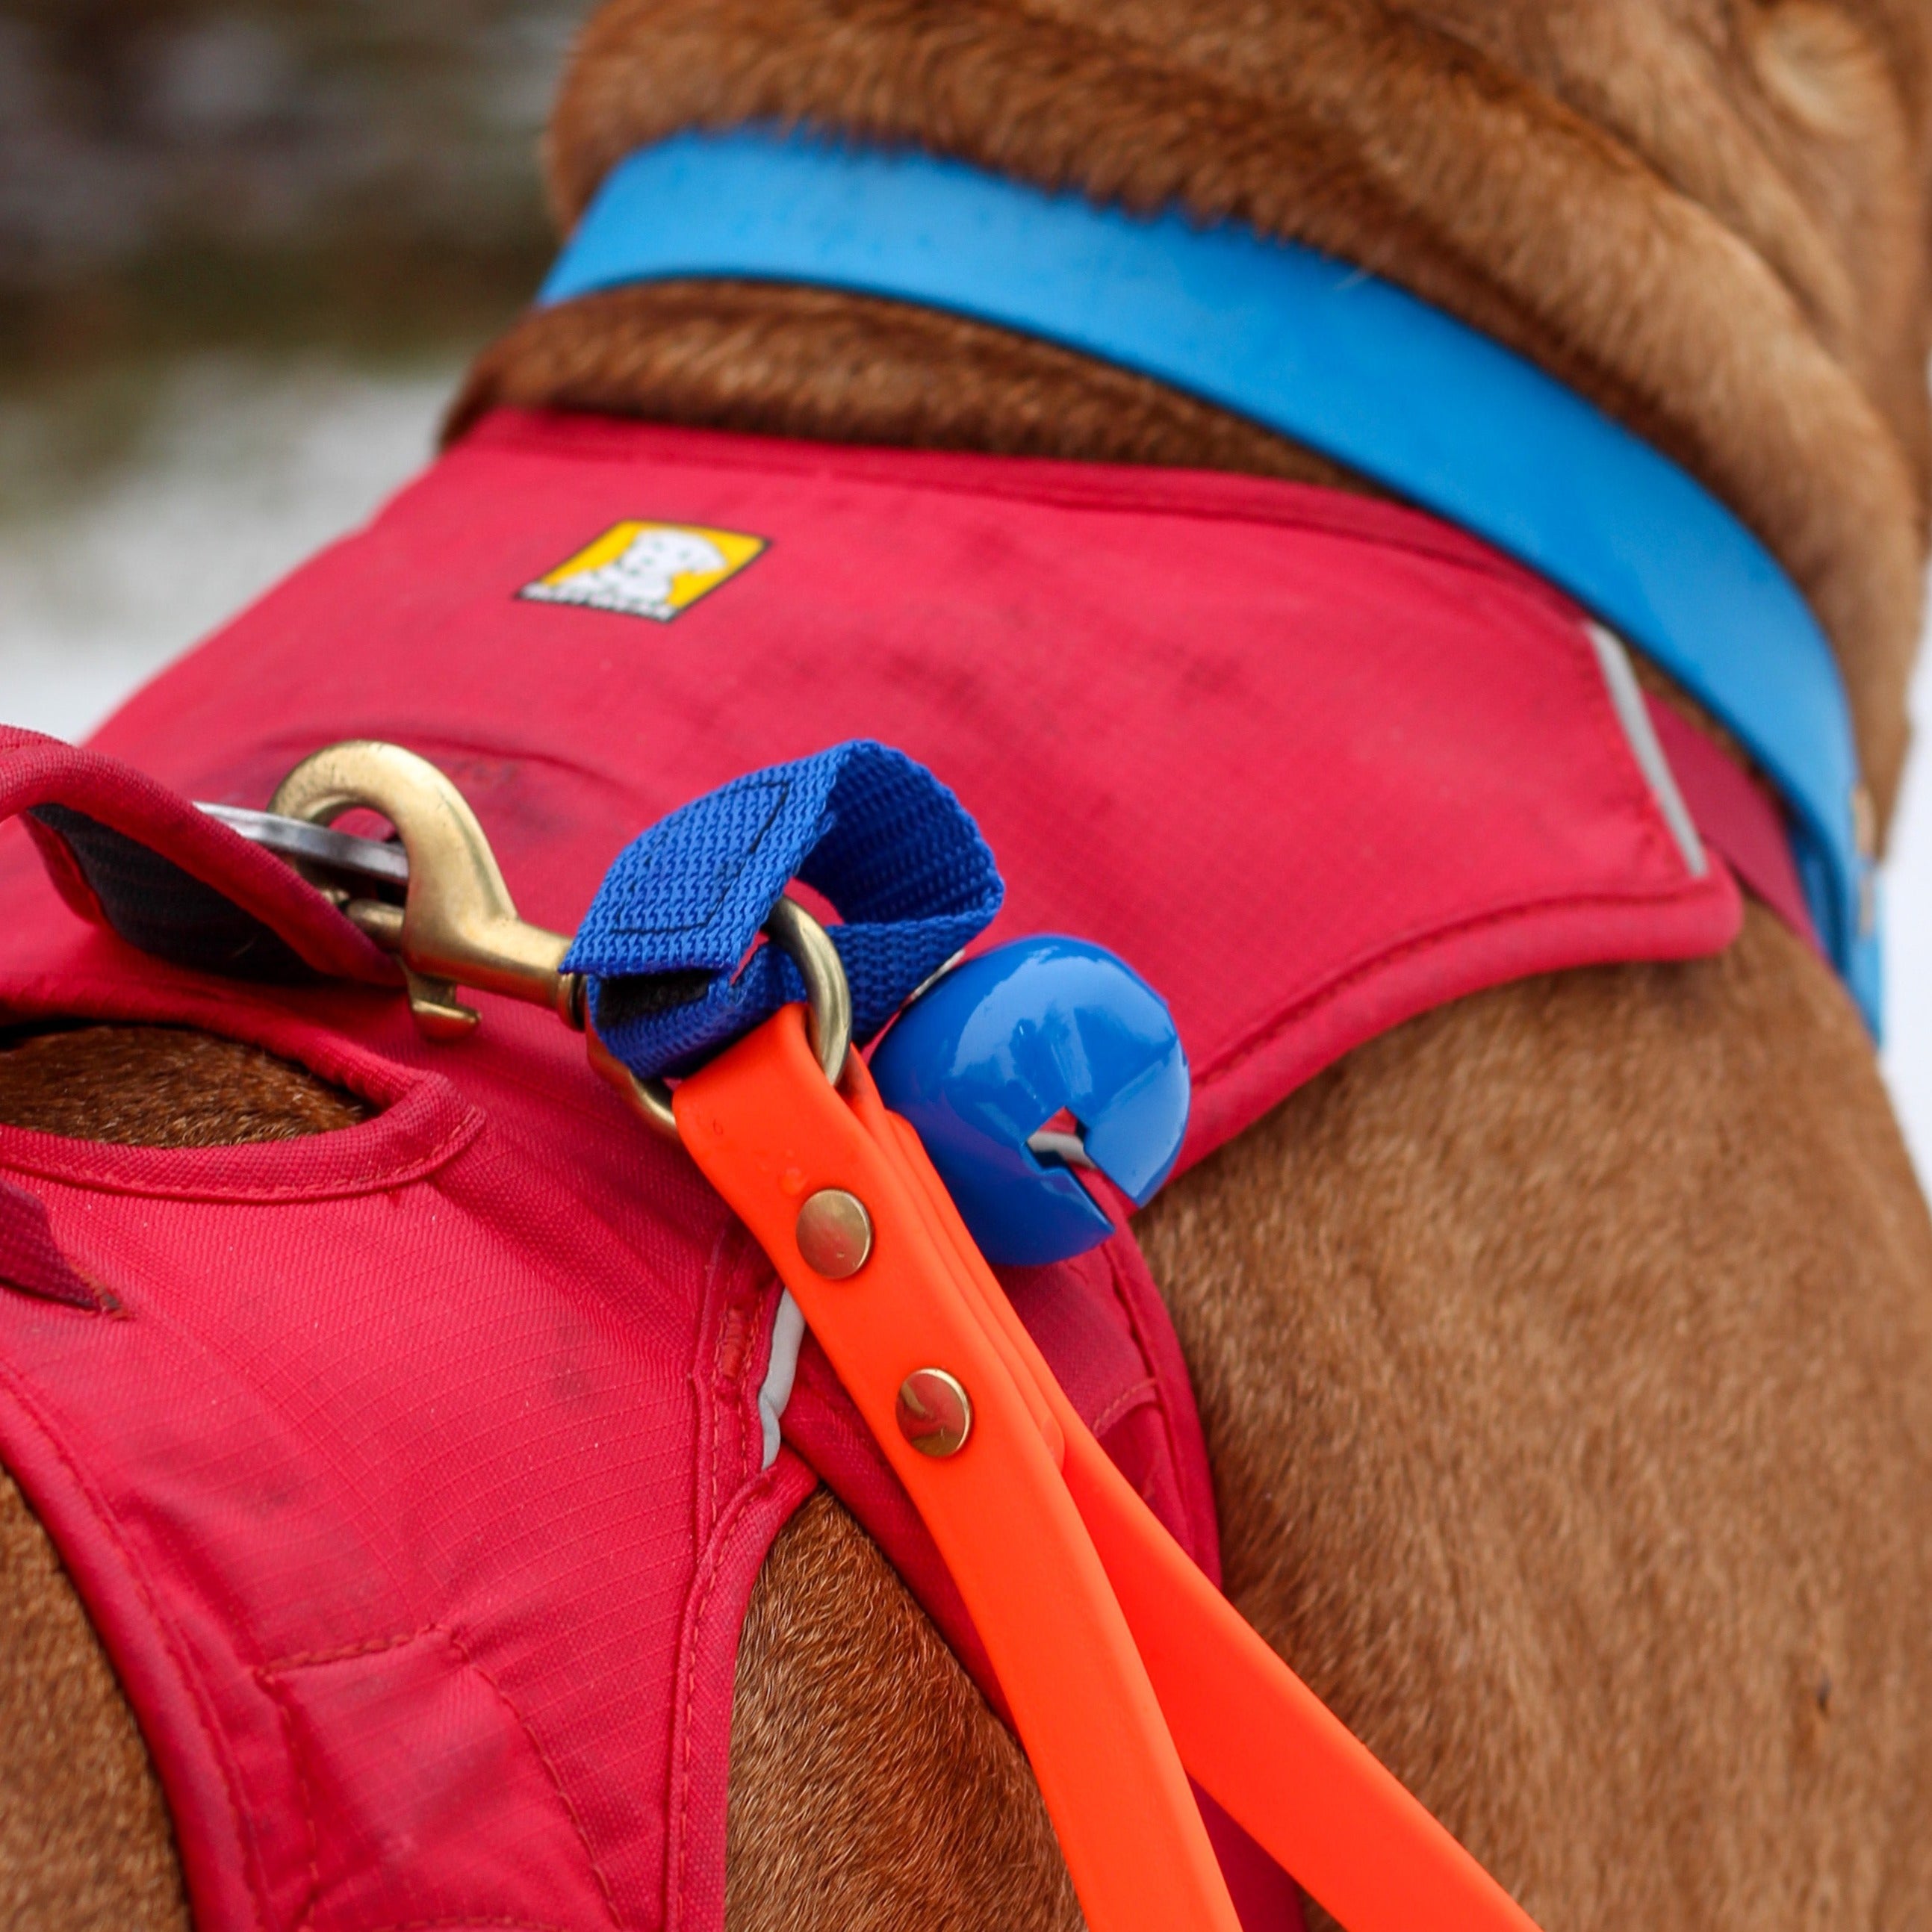 A Dog walking on the trails wearing a Ruffwear Dog Harness with a Biothane Grab Handle and Bear Bell attached for outdoor safety